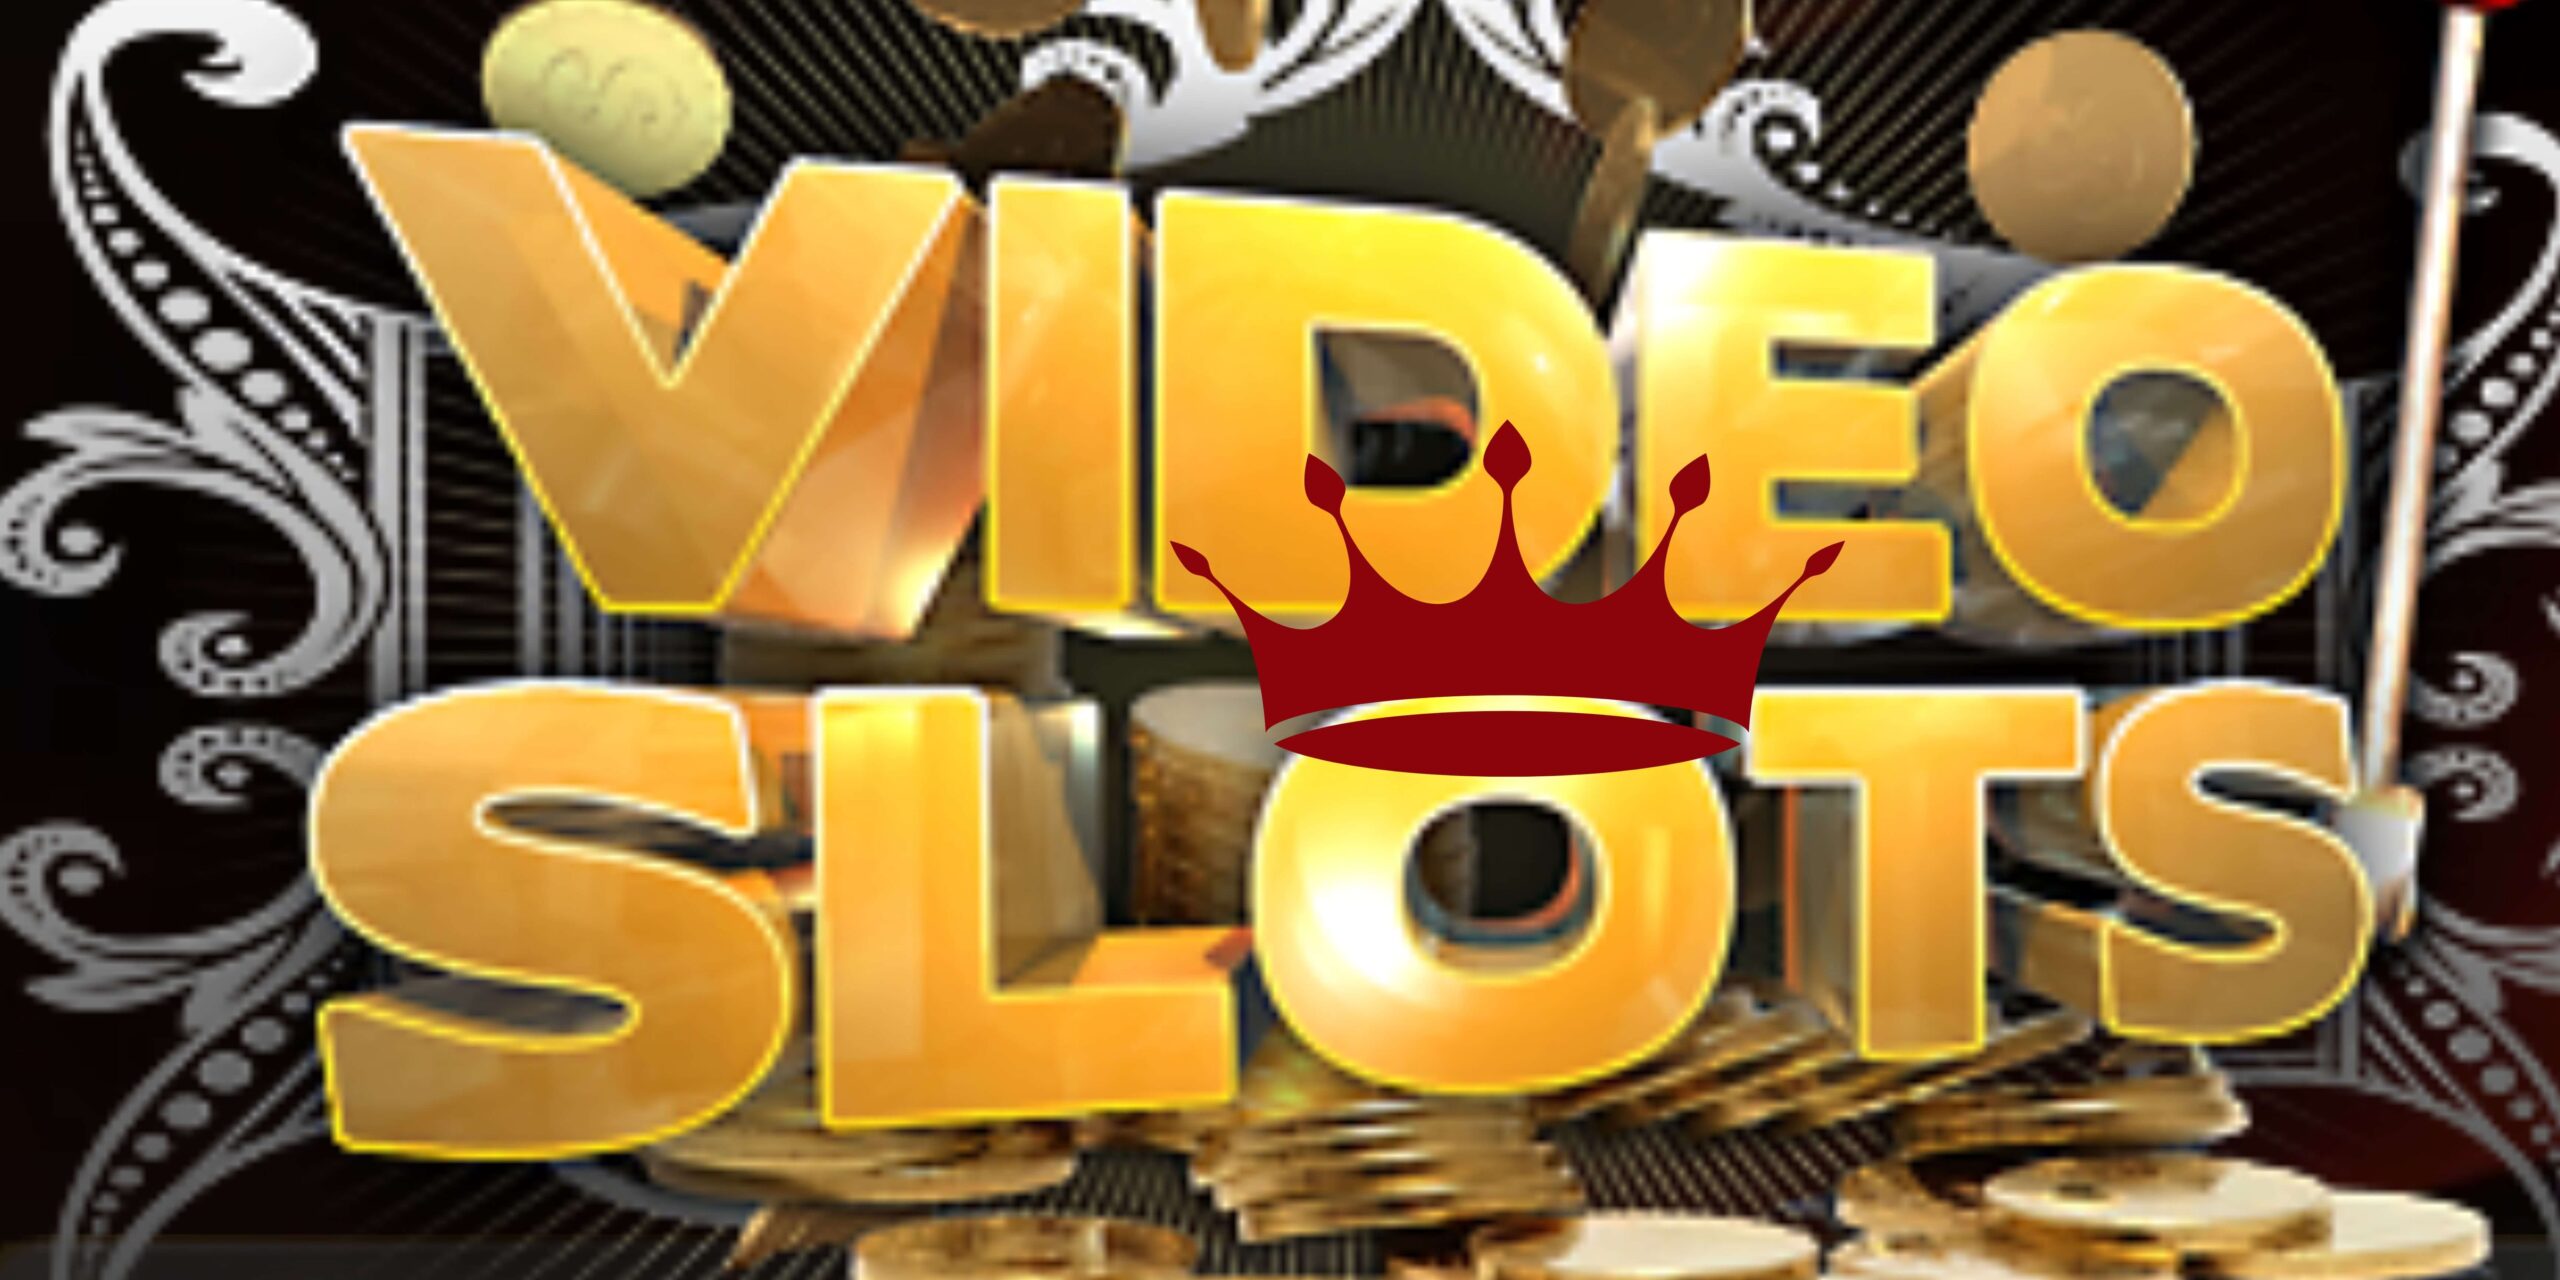 Videoslots Crowned as Best Operator for Second Consecutive Year